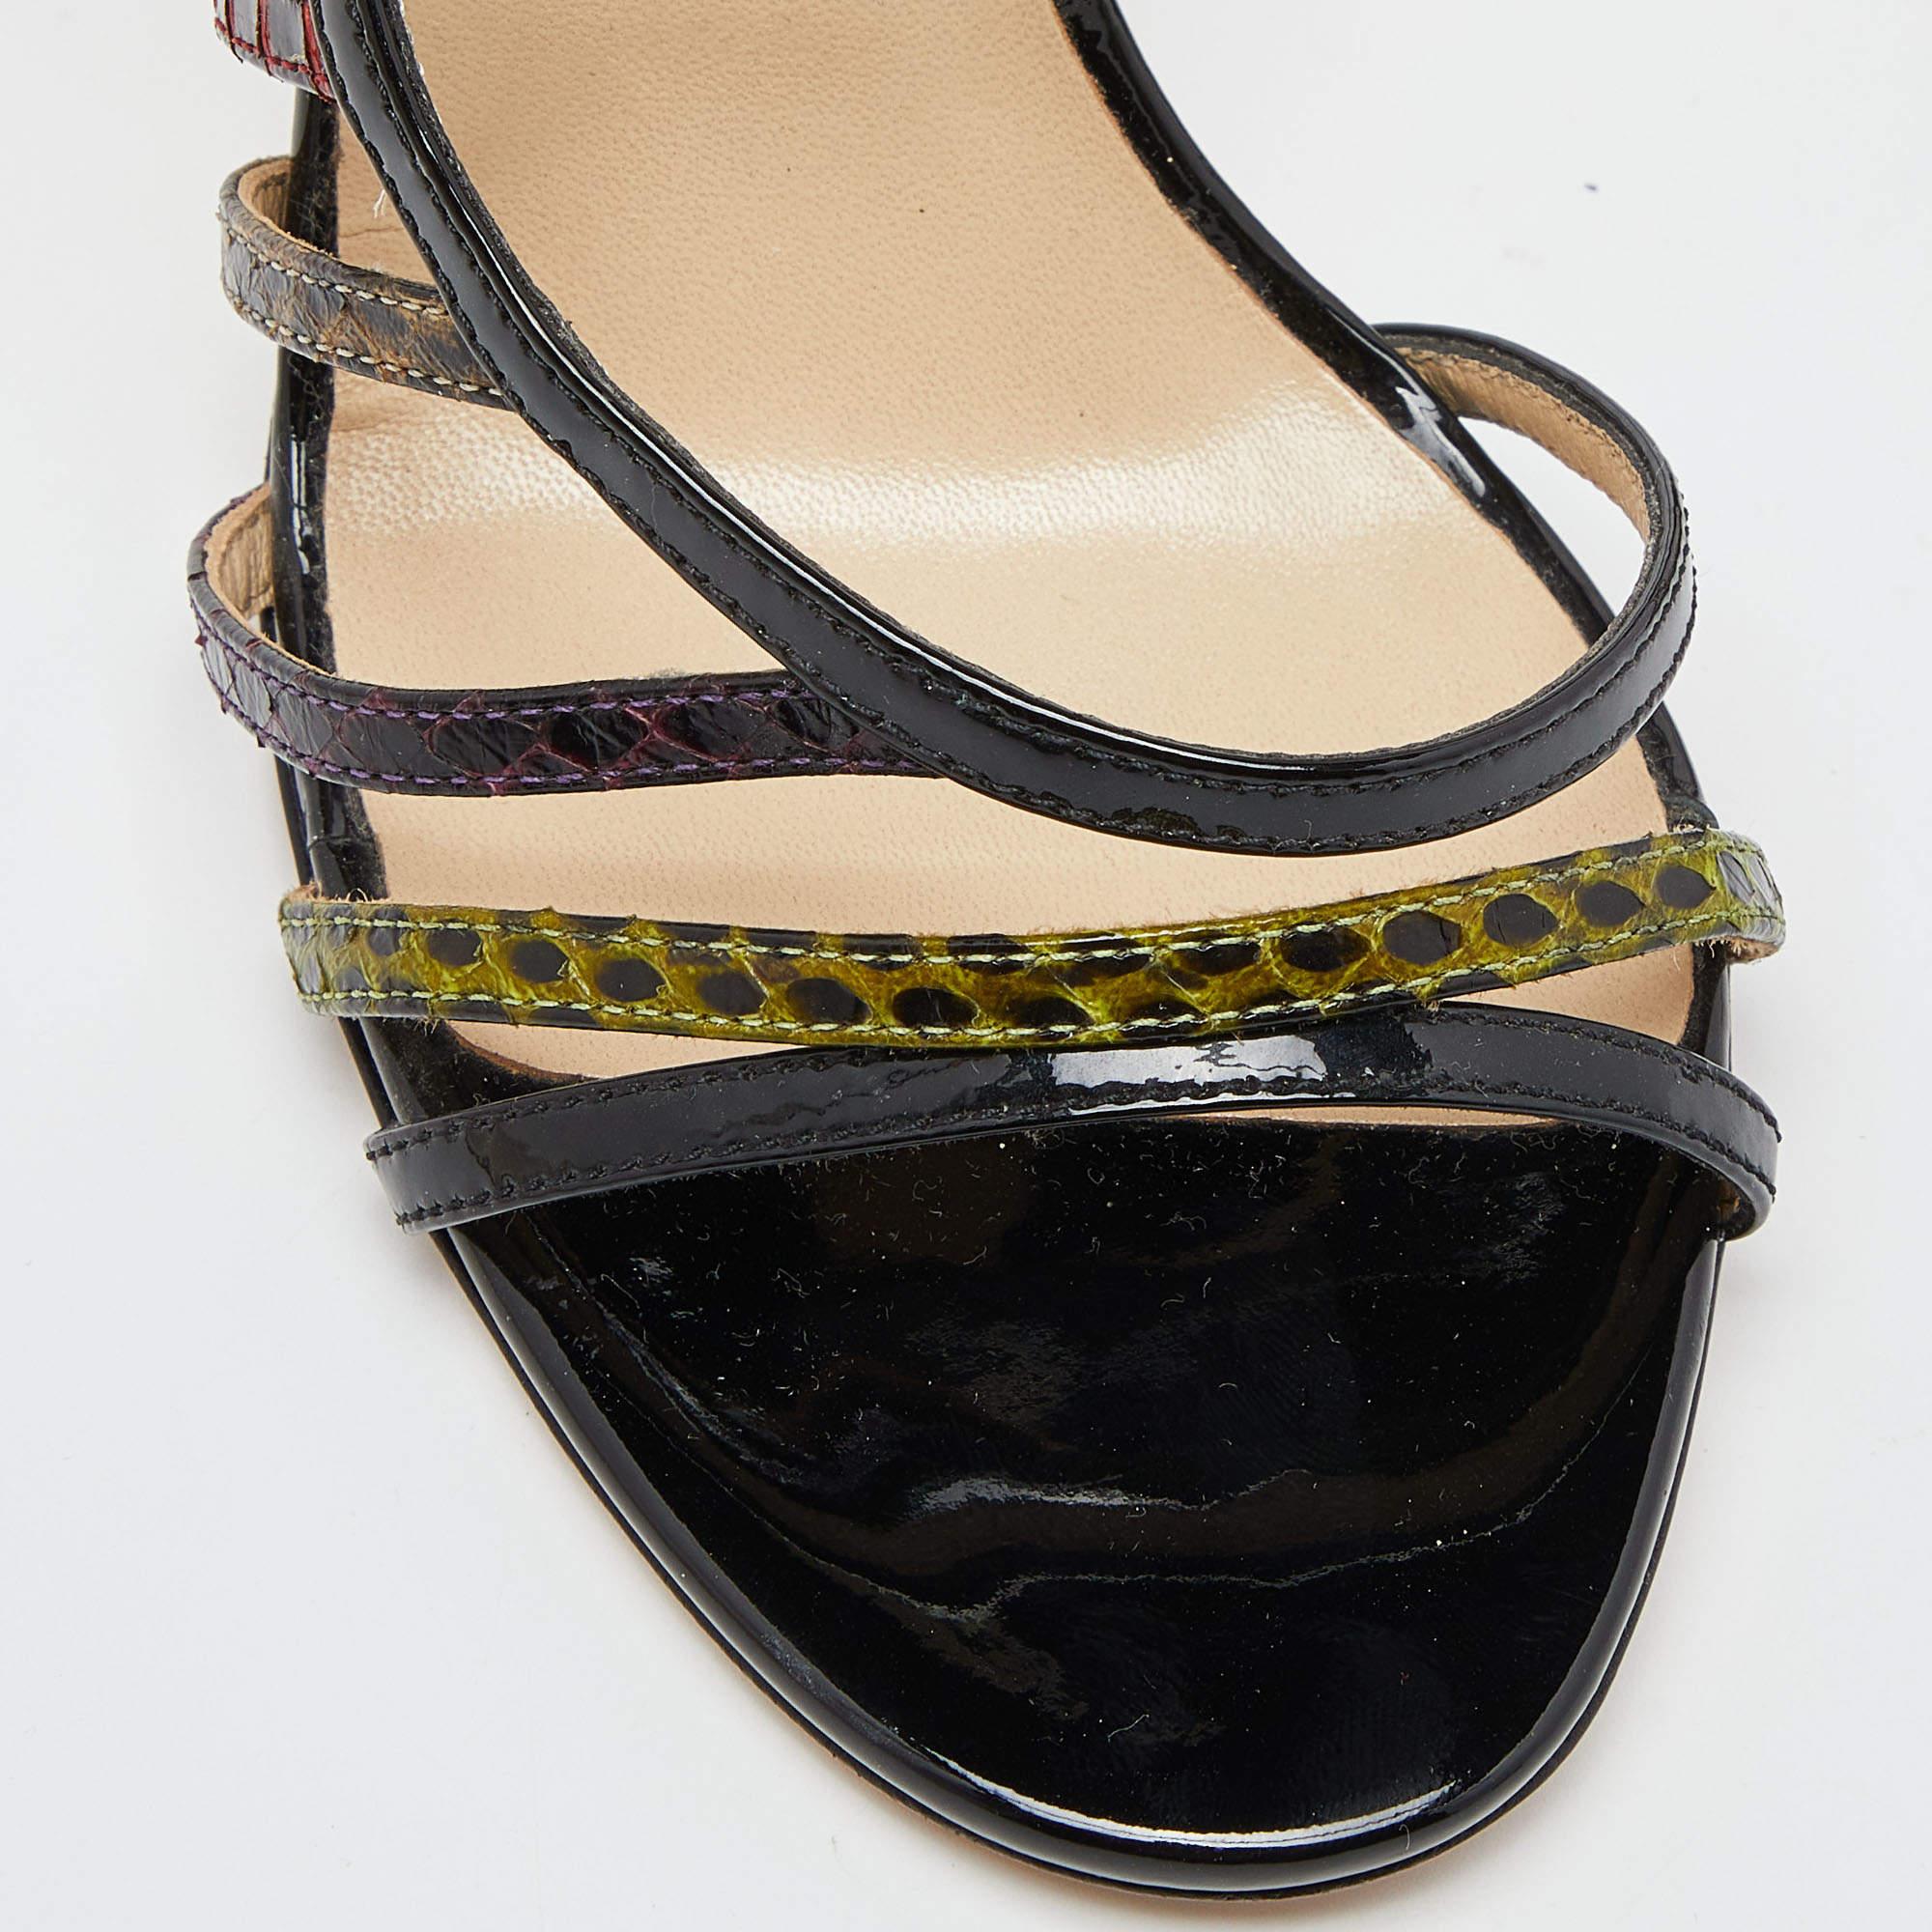 Jimmy Choo Multicolor Snakeskin and Patent Leather Strappy Sandals Size 37 1